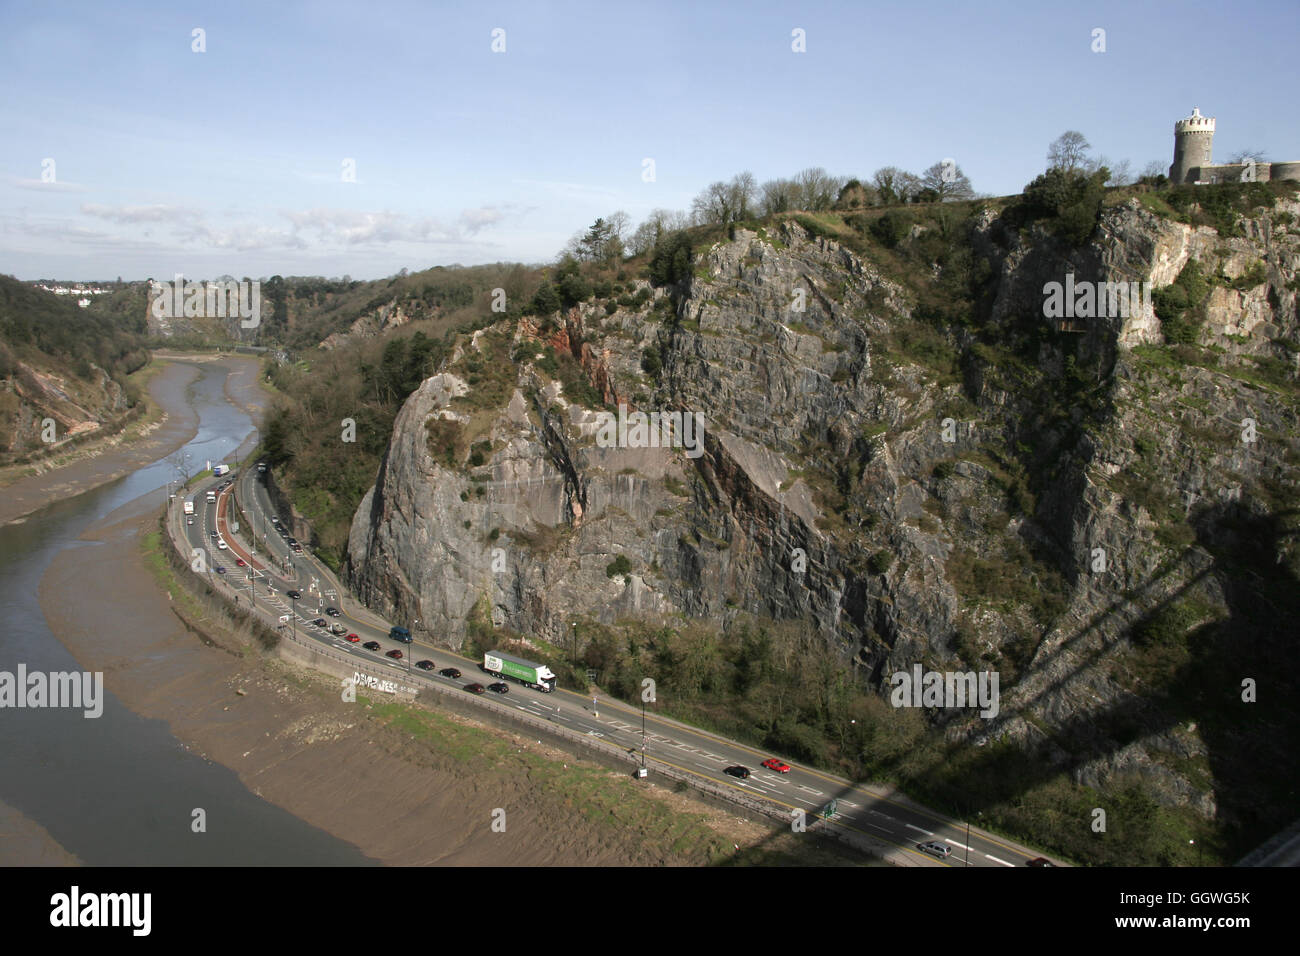 A view of the Gorge, River Avon and road below from the Clifton Suspension Bridge. Stock Photo